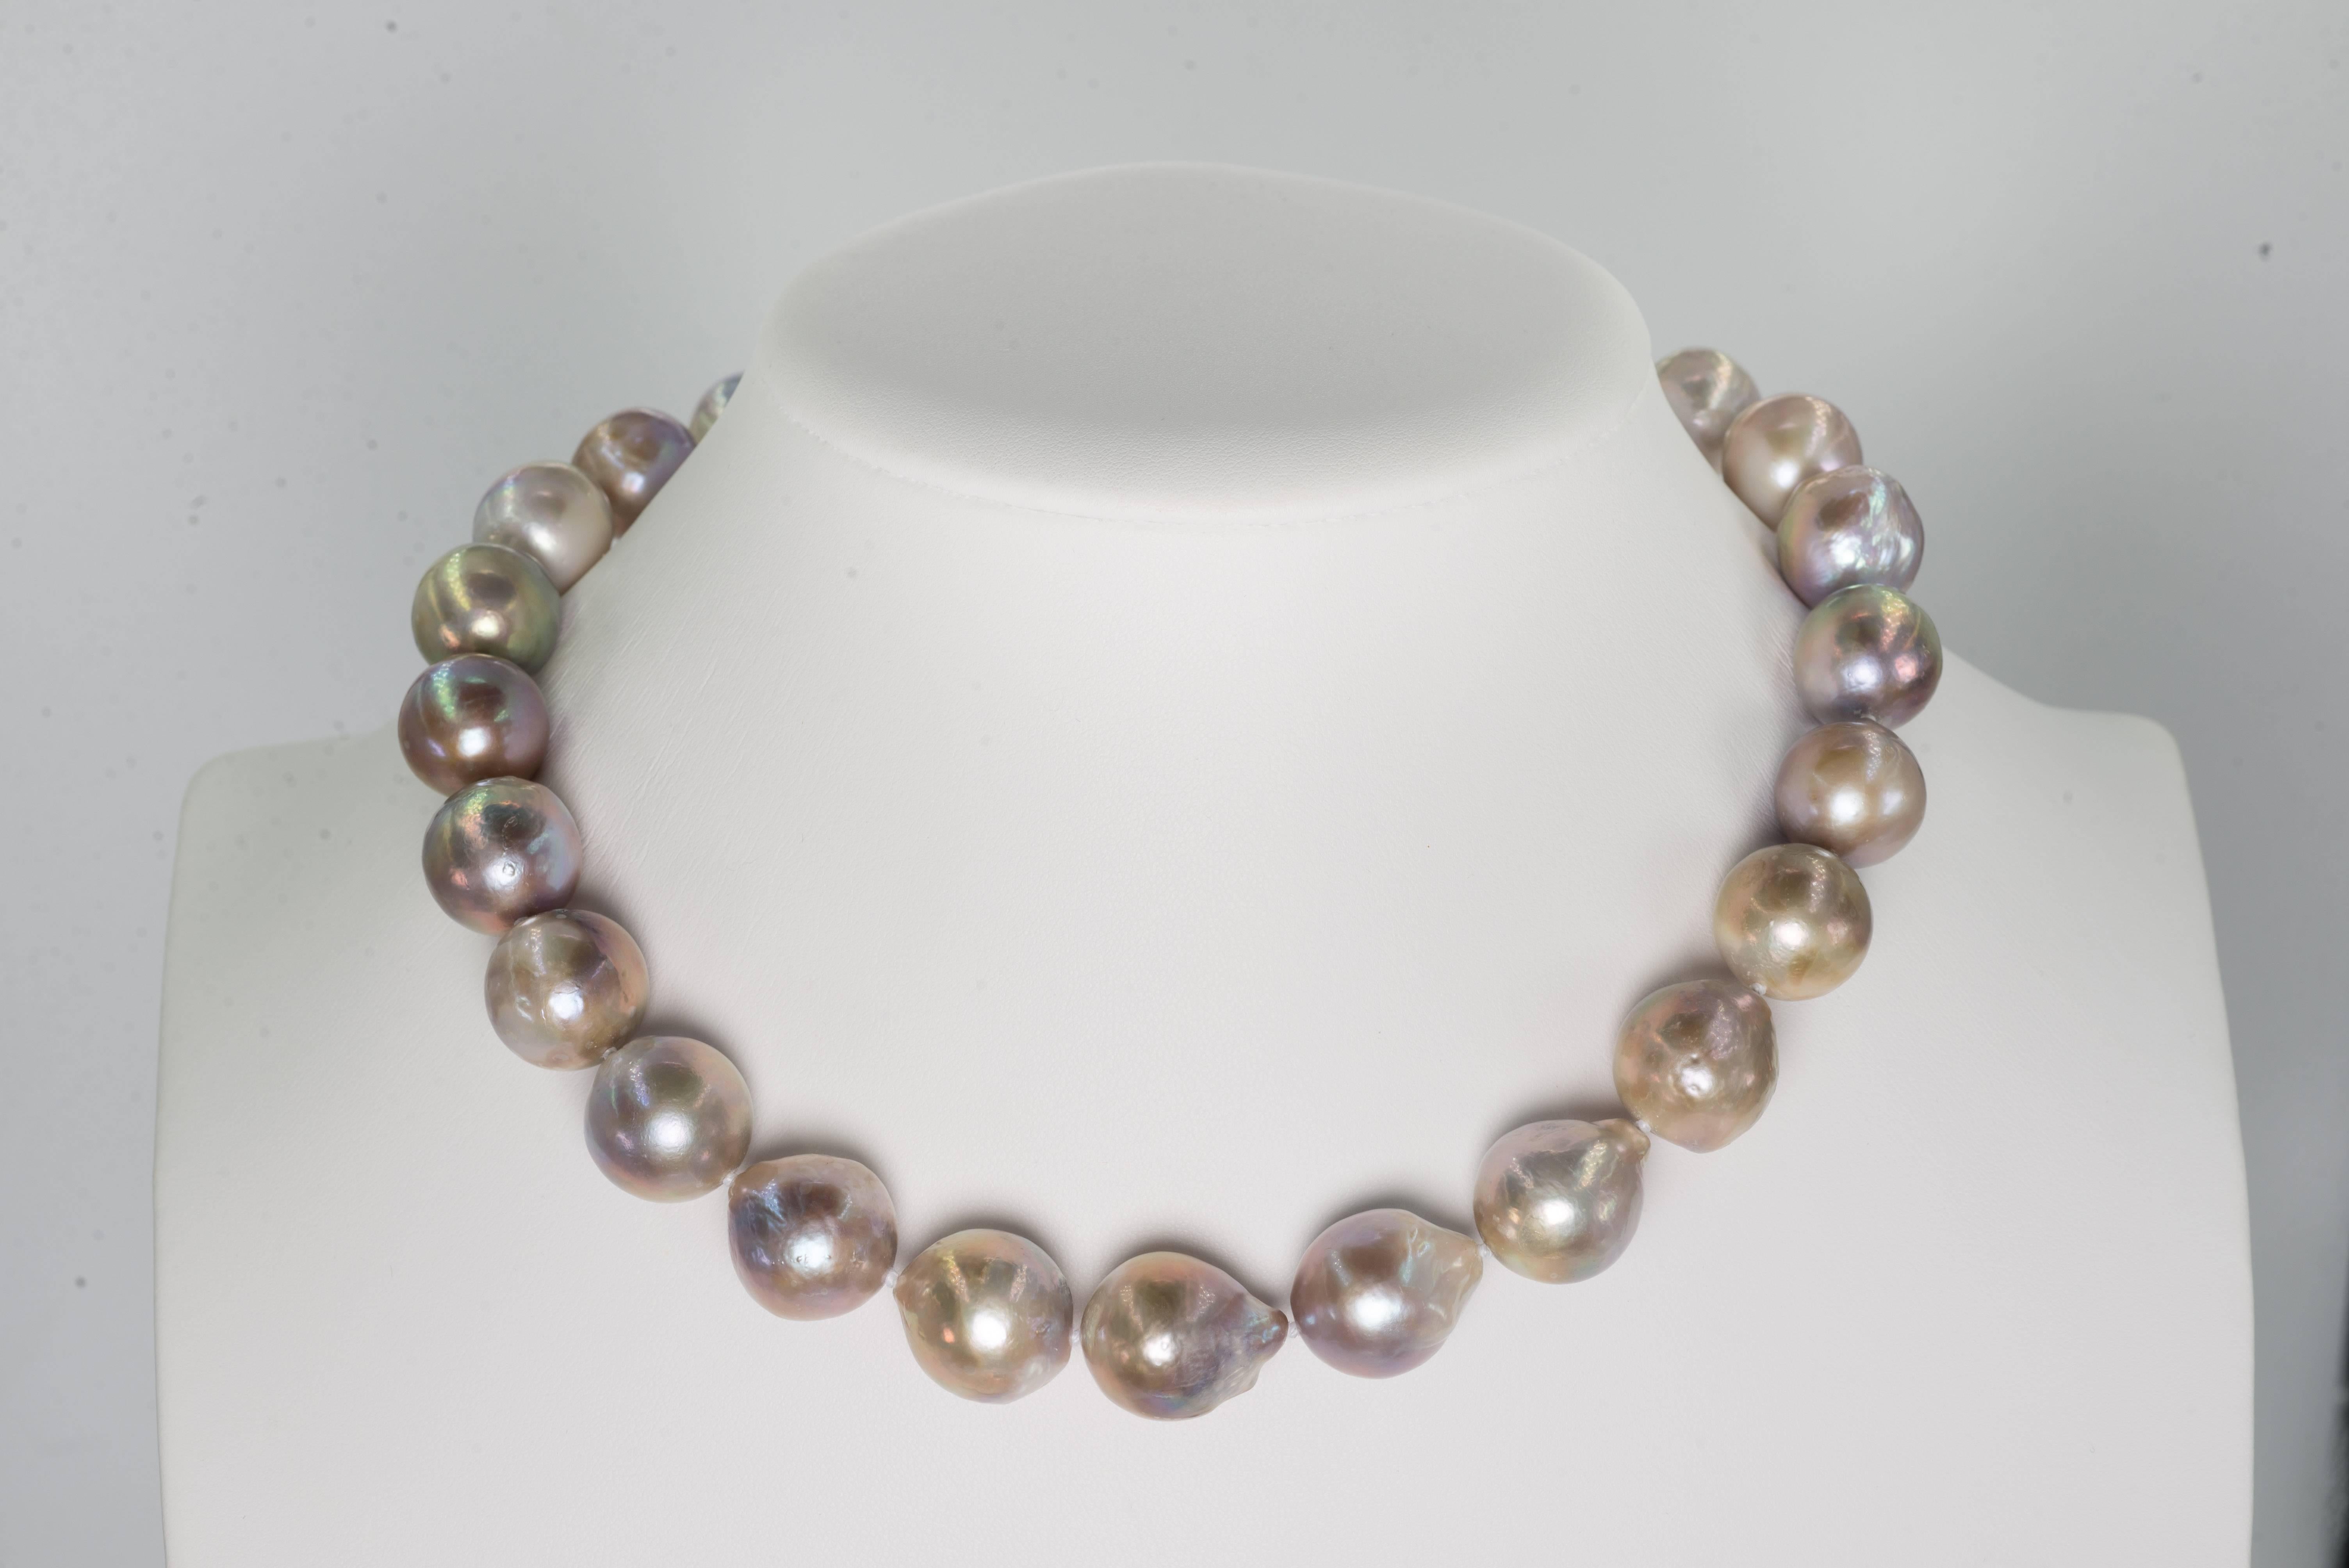 A wonderful high luster Rose Pompadour cultured natural water slightly baroque large pearl necklace, slightly graduated 18mm to 15mm, most pearls on the larger size attached to a 14 karat gold invisible clasp. The necklace is 18 inches long.

